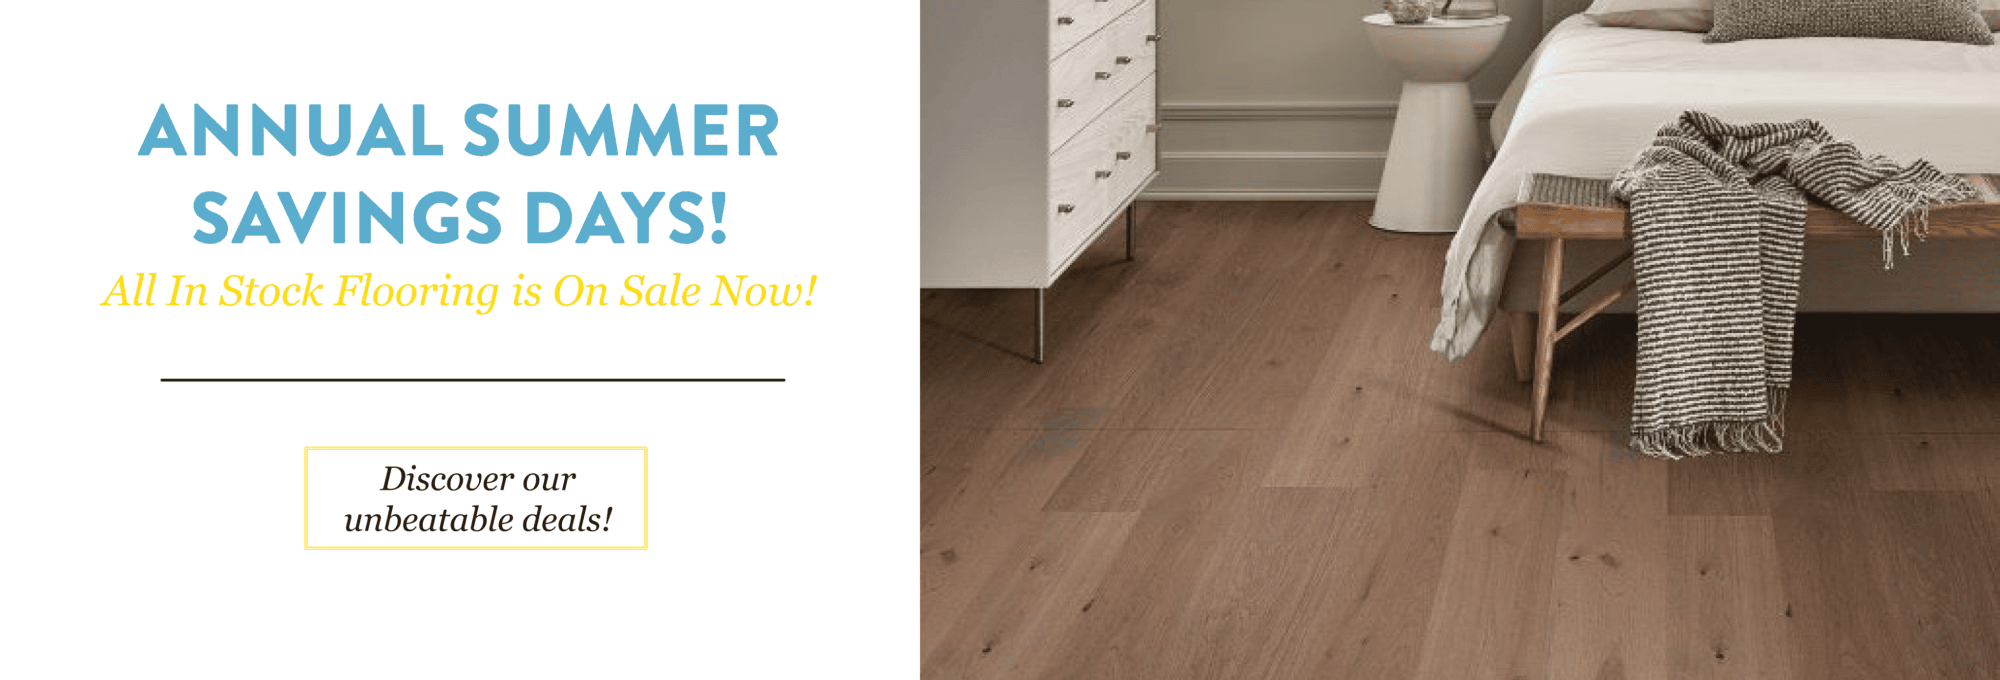 The summer sale event from Floors USA - stop by their showroom in King of Prussia, PA today!